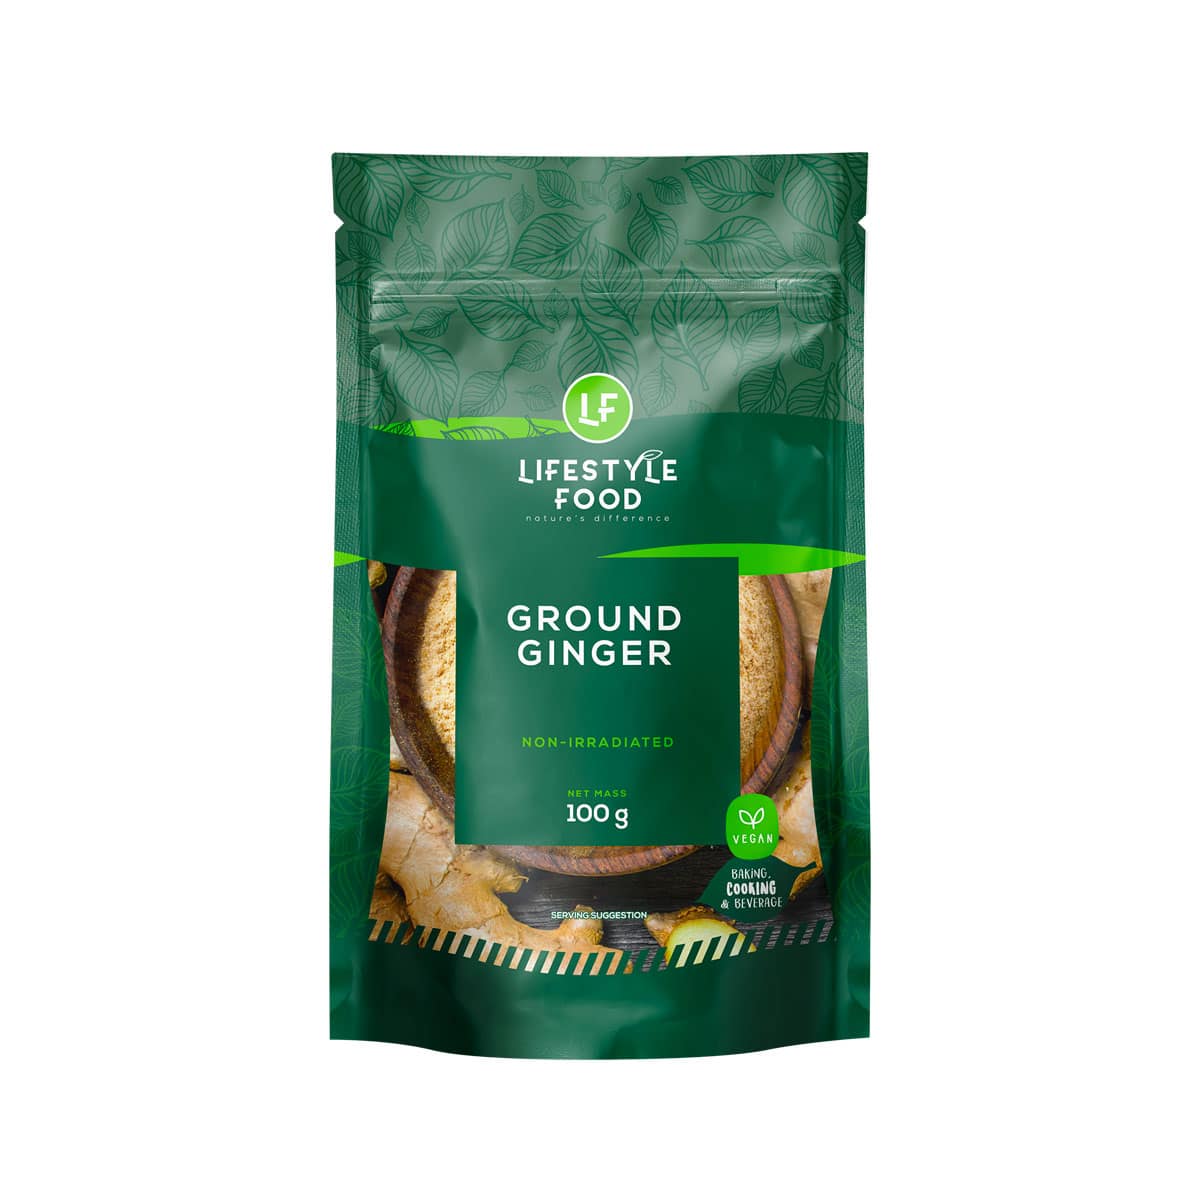 Lifestyle Food Ground Ginger Refill Non-Irradiated - 100g